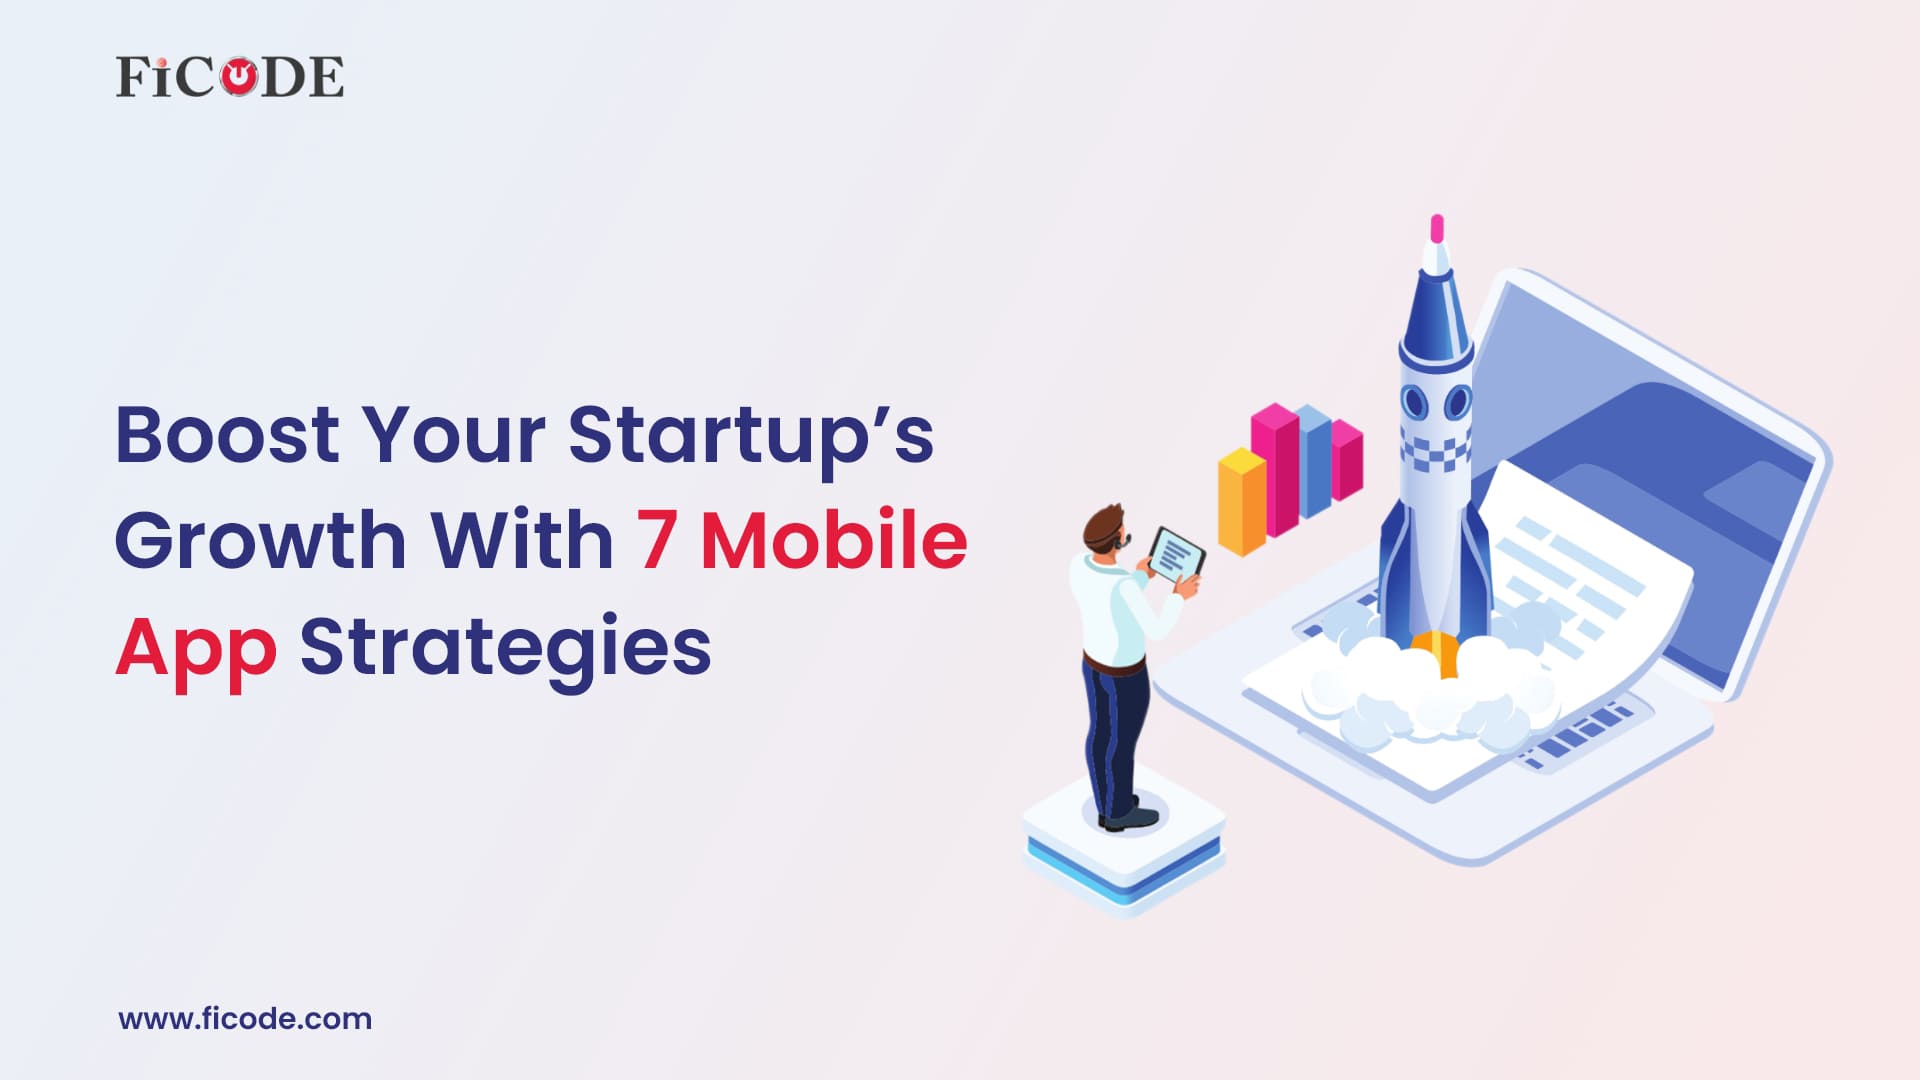 Boost your startup’s growth with 7 mobile app strategies